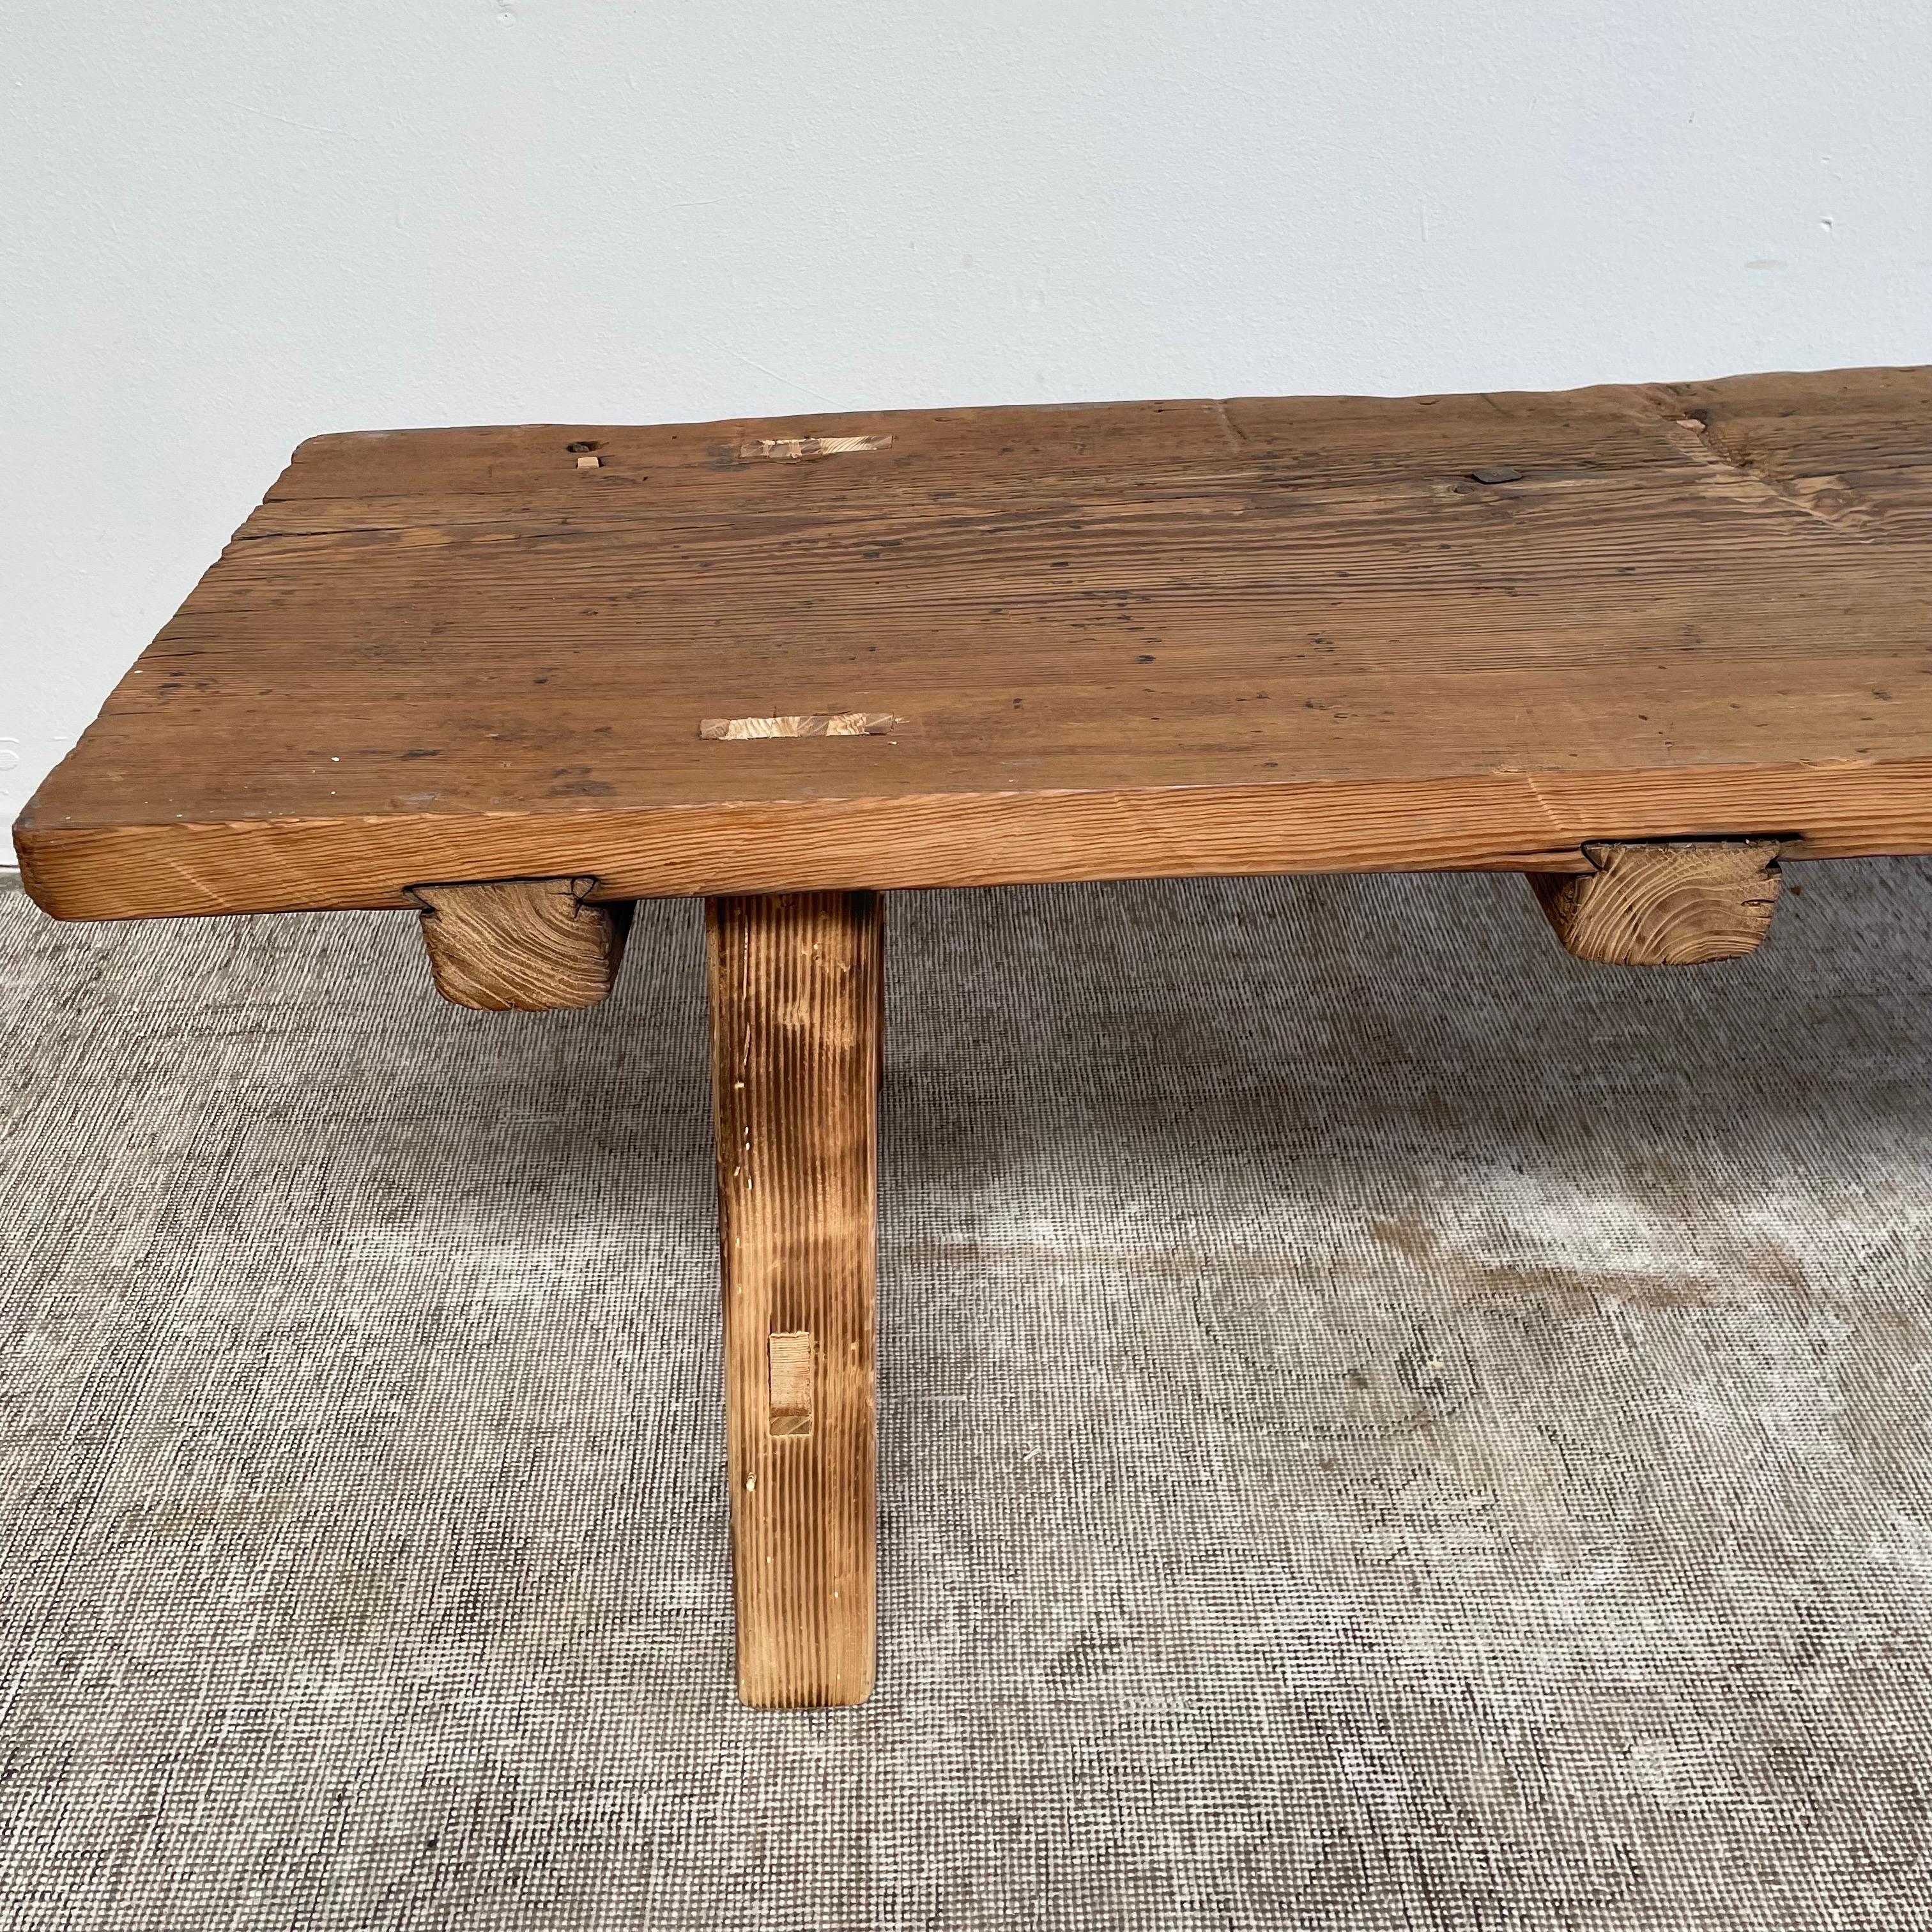 Vintage Elm Wood Coffee Table or Wide Seat Bench In Good Condition For Sale In Brea, CA